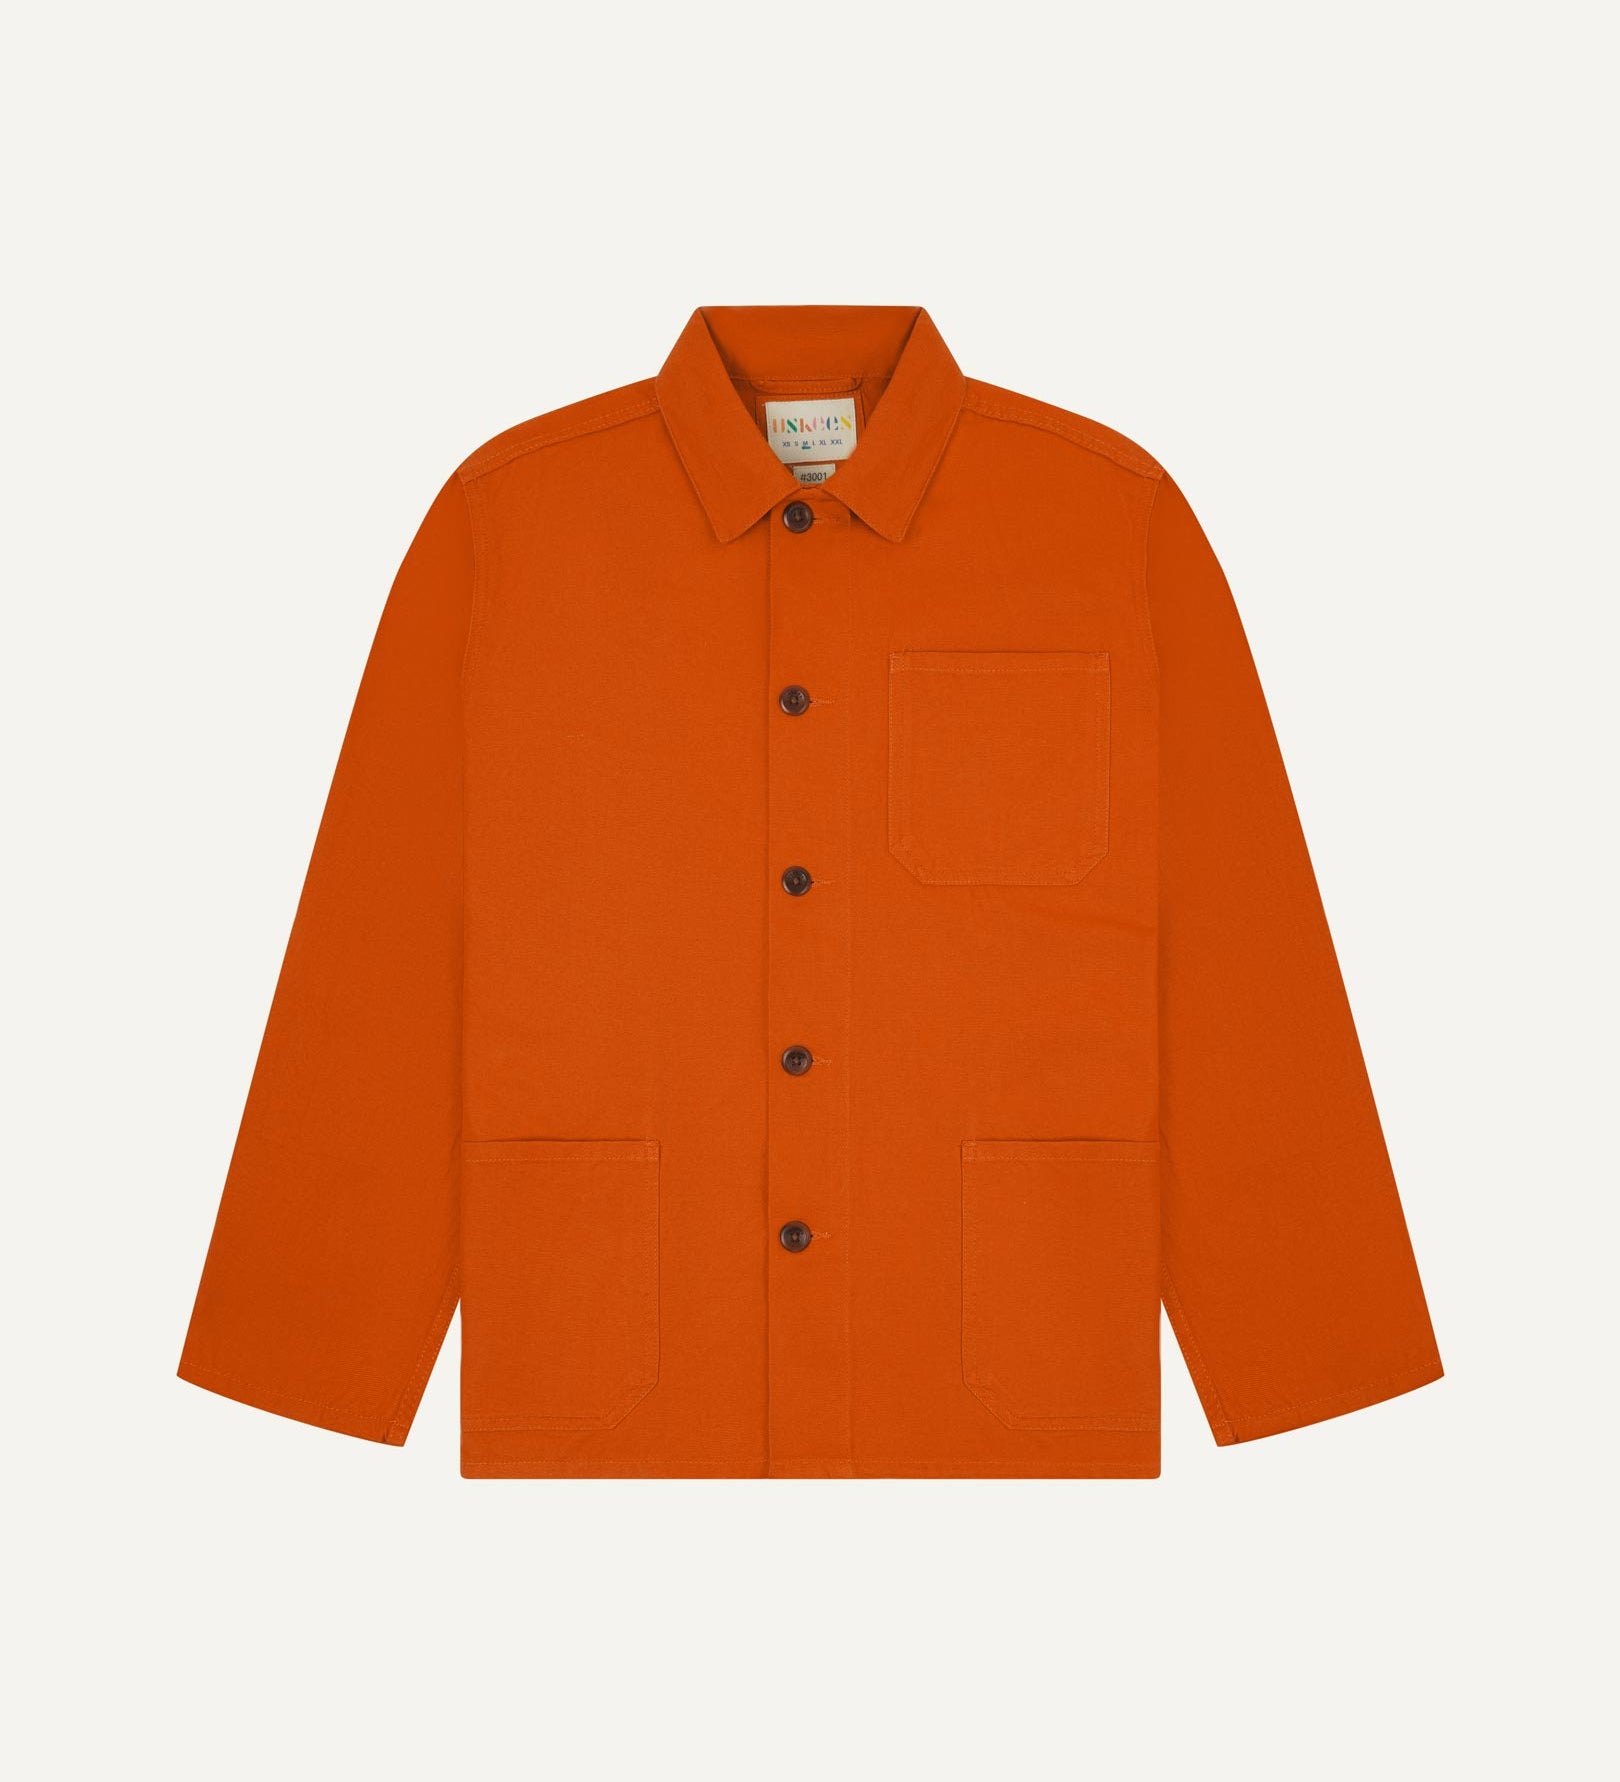 Front flat shot of golden-orange, buttoned organic cotton overshirt. Clear view of chest and hip pockets, corozo buttons and Uskees branding label.